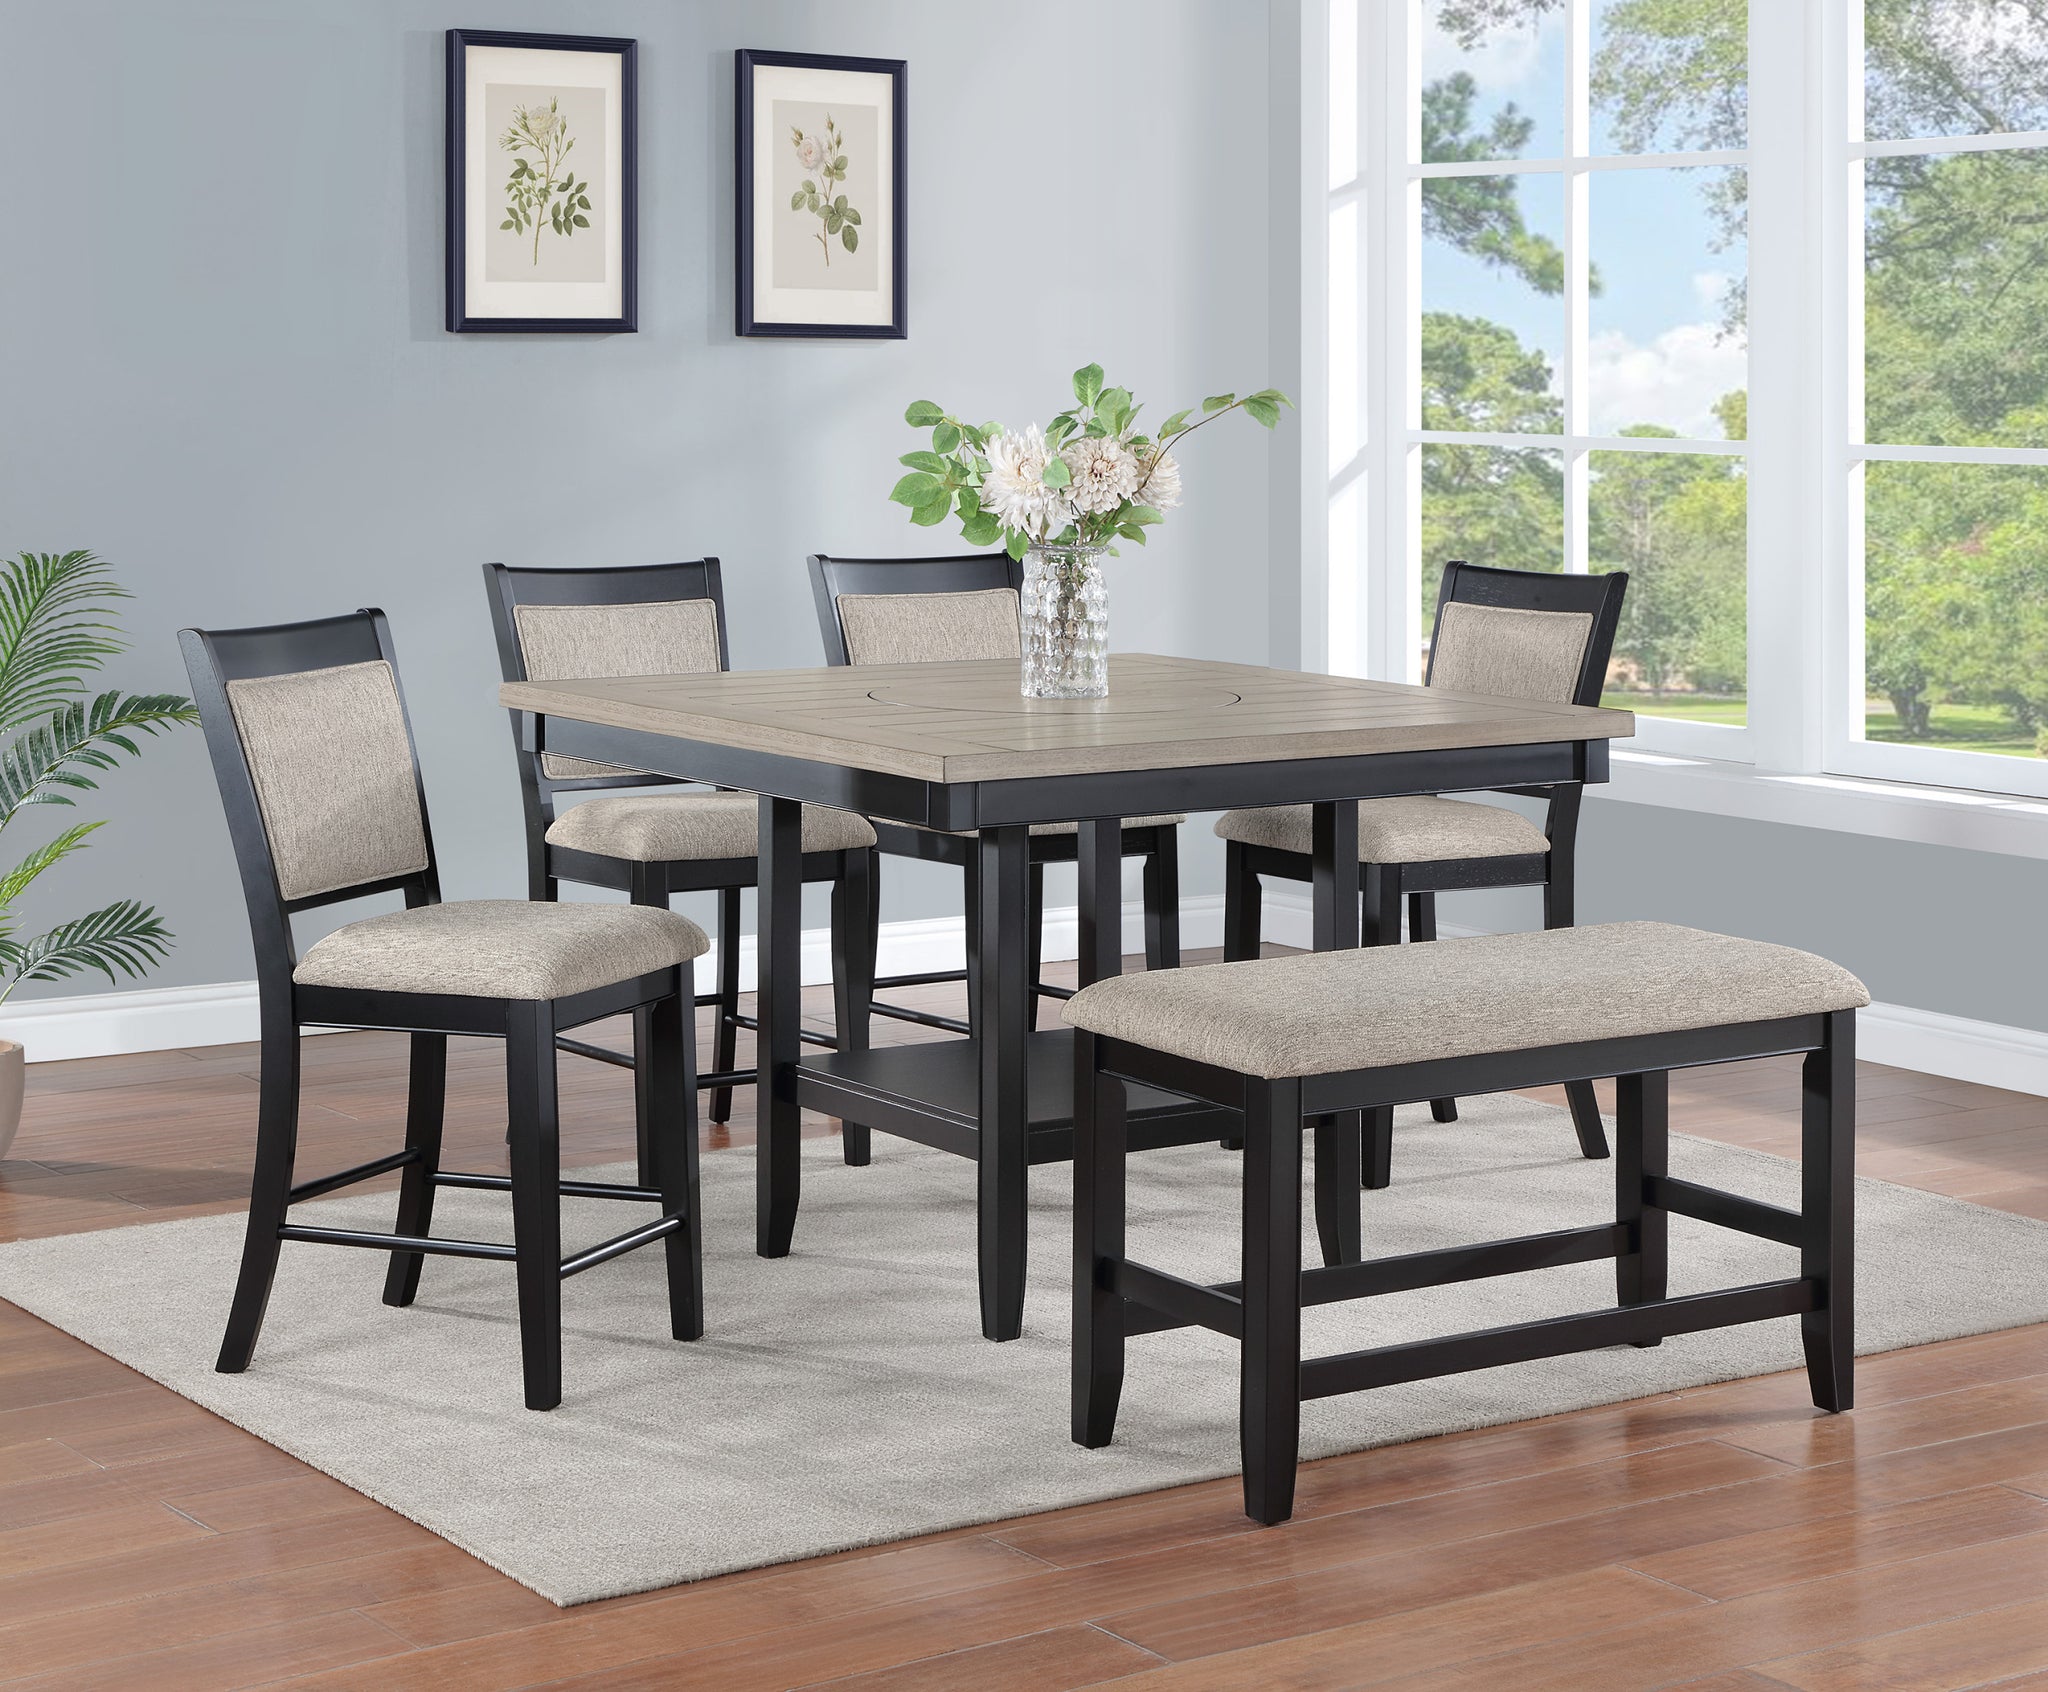 6pc Dining Set Contemporary Farmhouse Style Counter upholstered chair-wood-light gray-seats